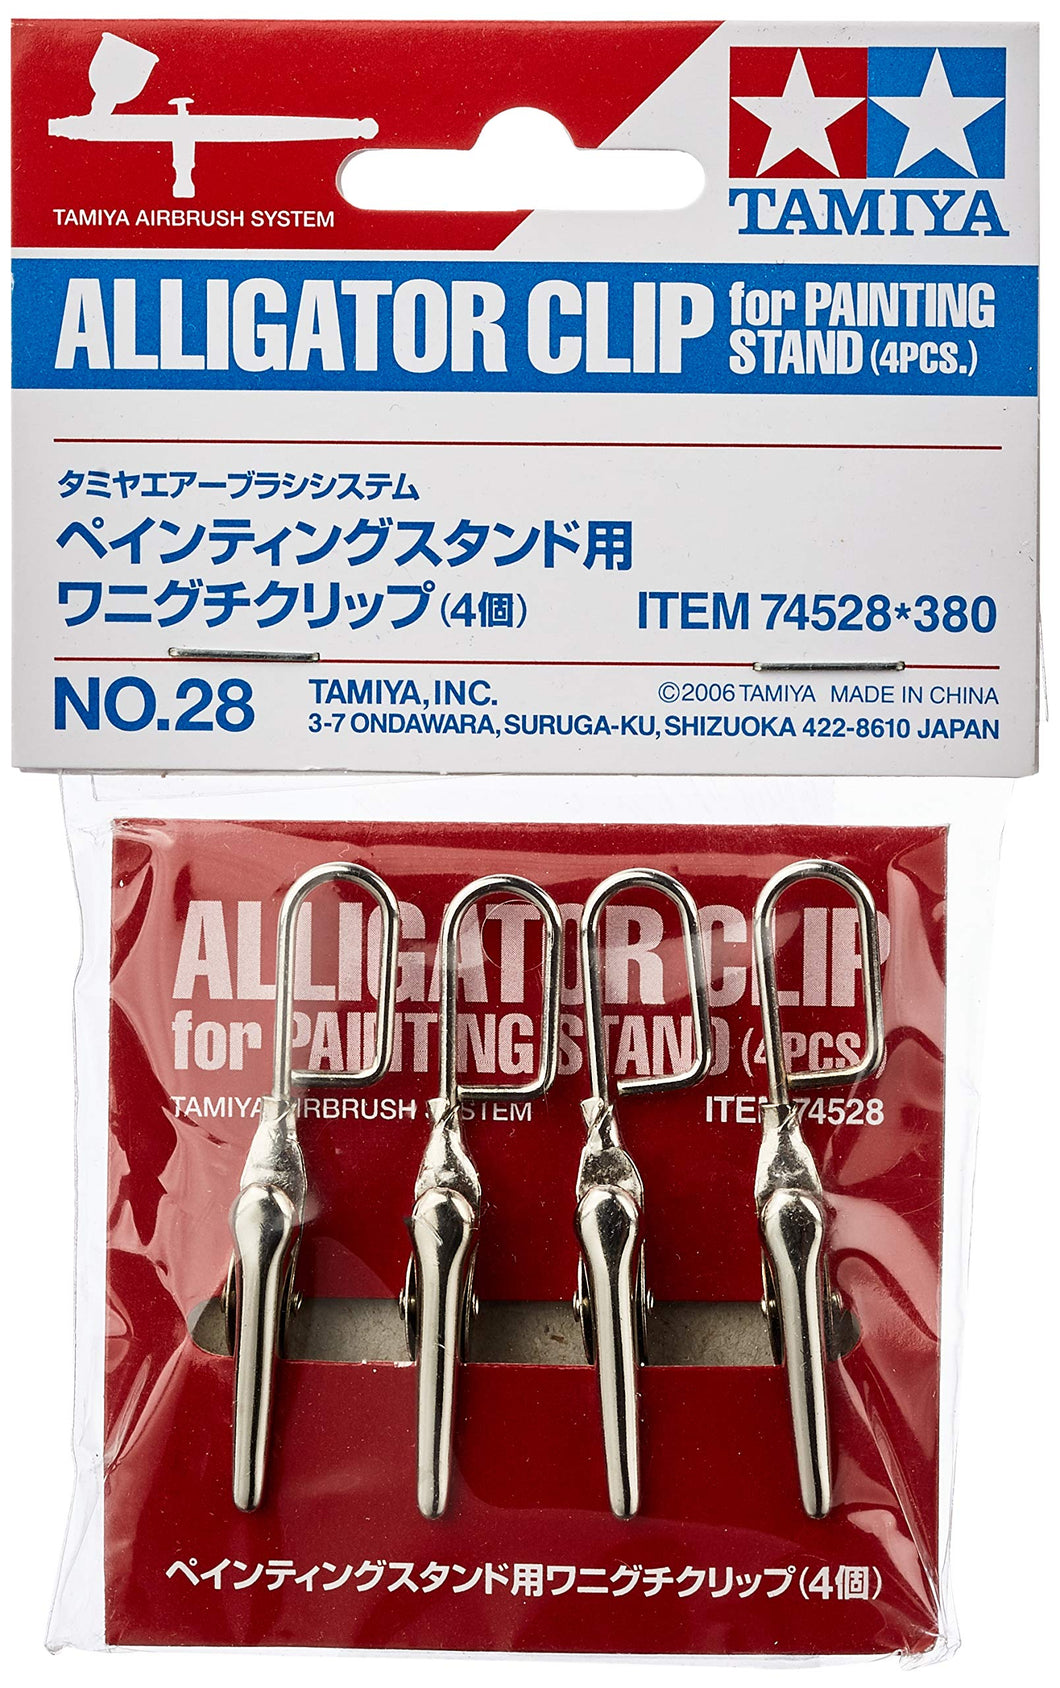 Alligator Clips for Painting Stand x4